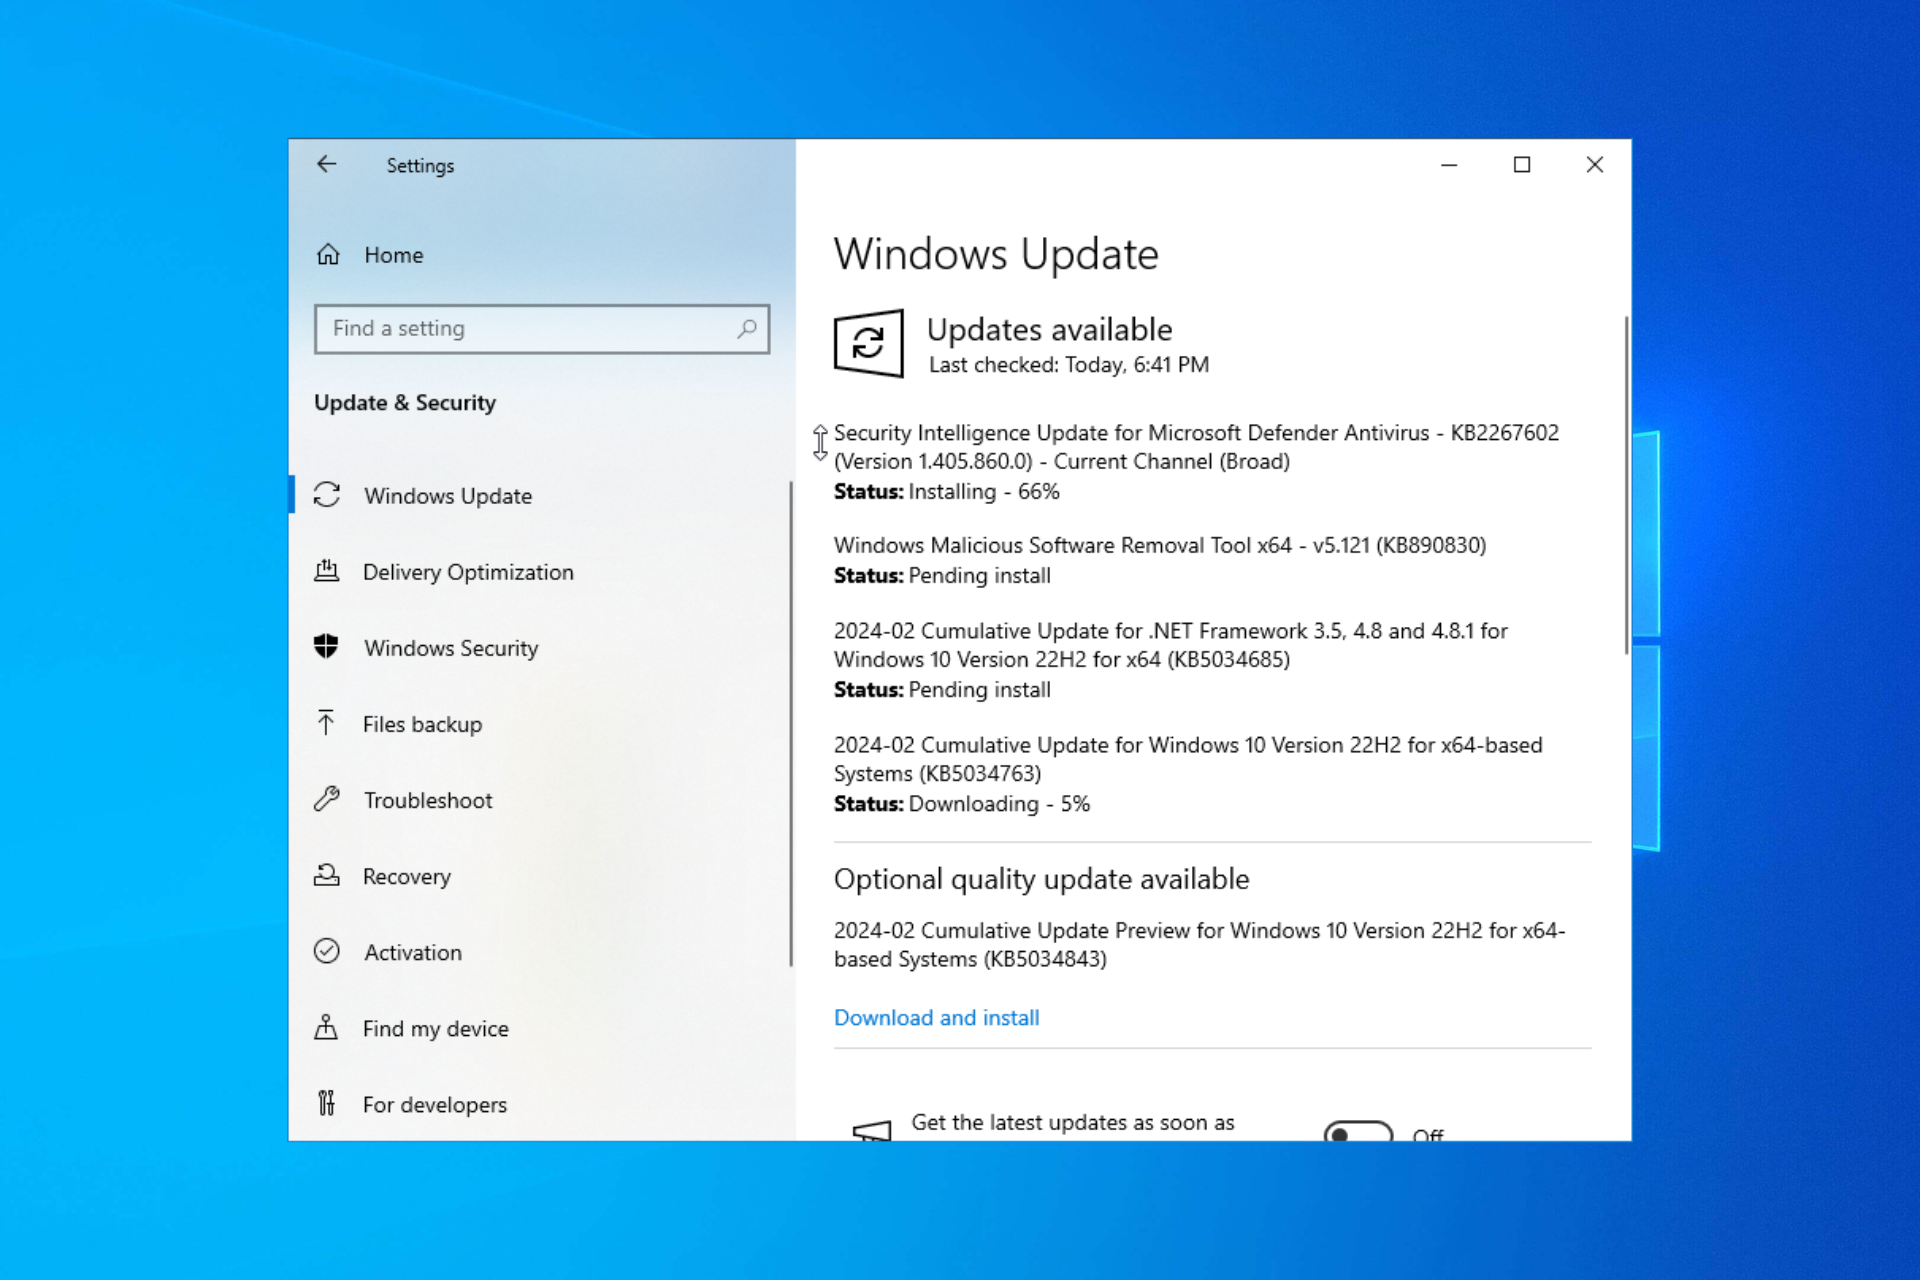 Microsoft released Windows 10 KB5034843 with new changes and improvements